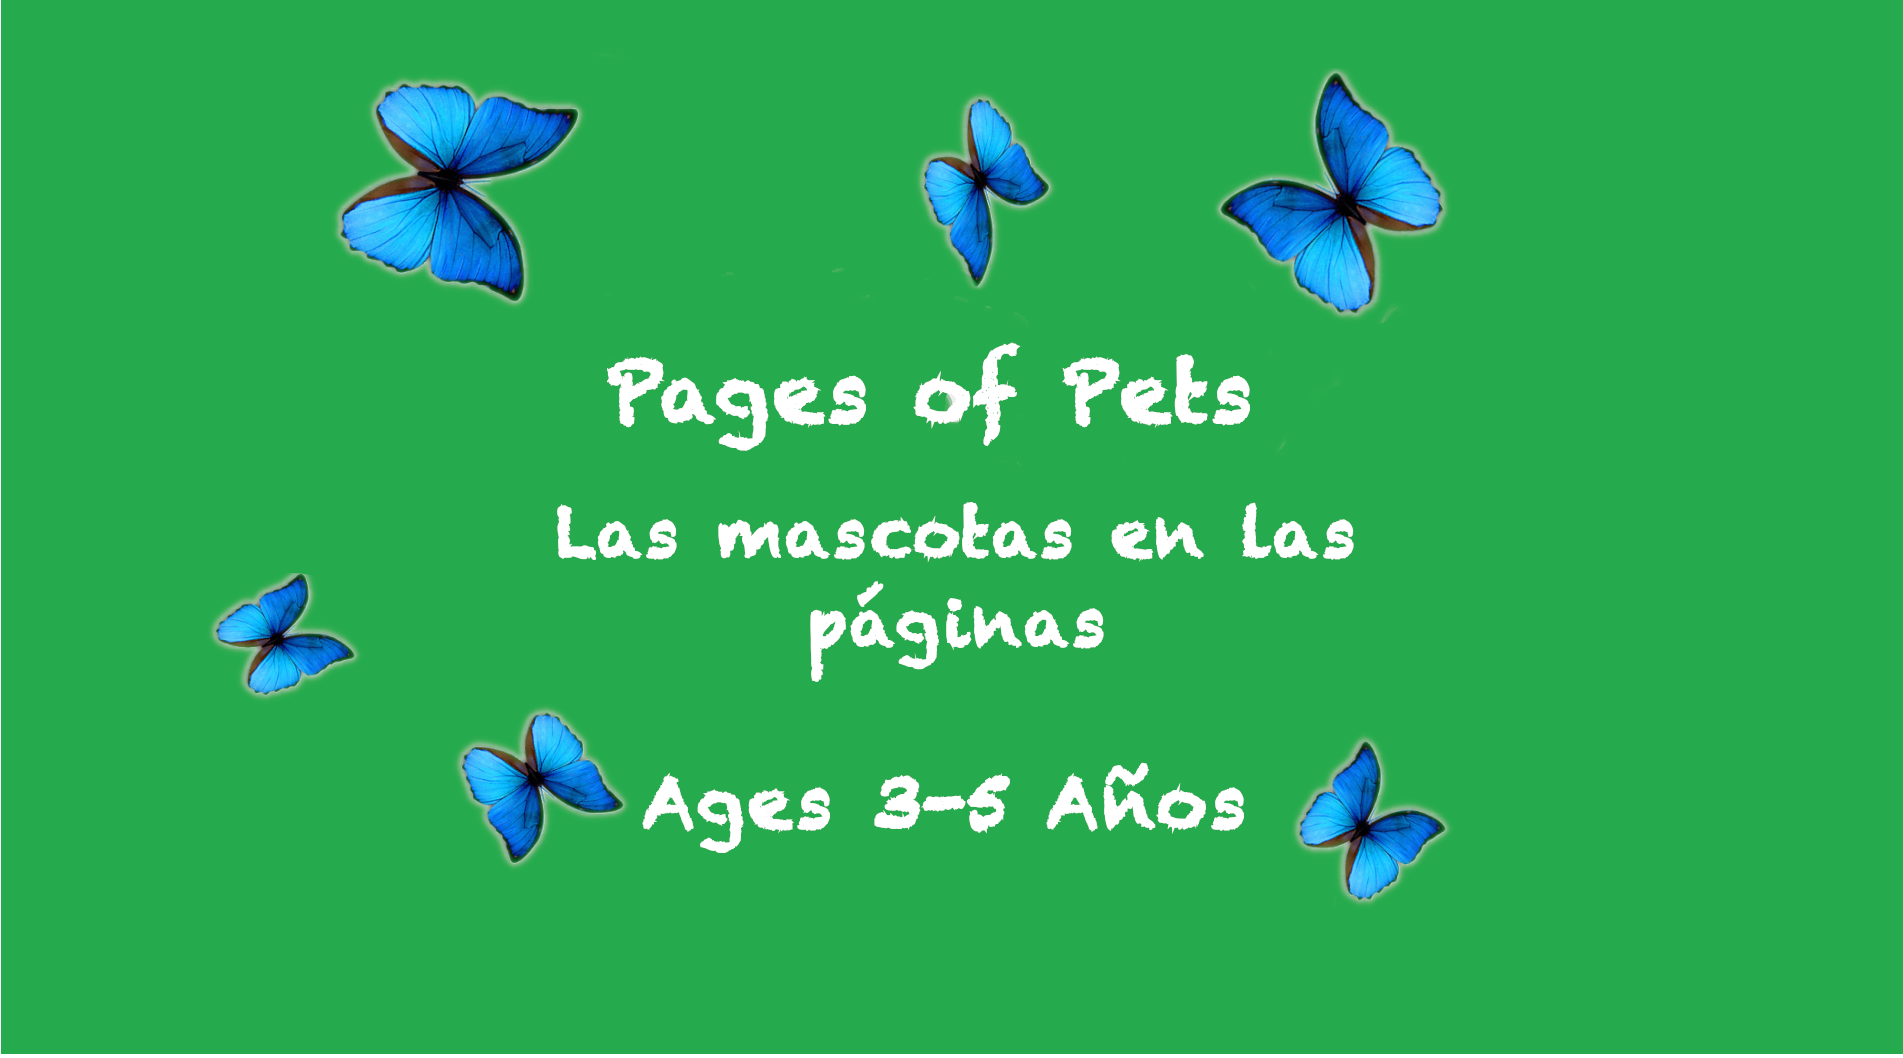 Pages of Pets for 3-5 year olds